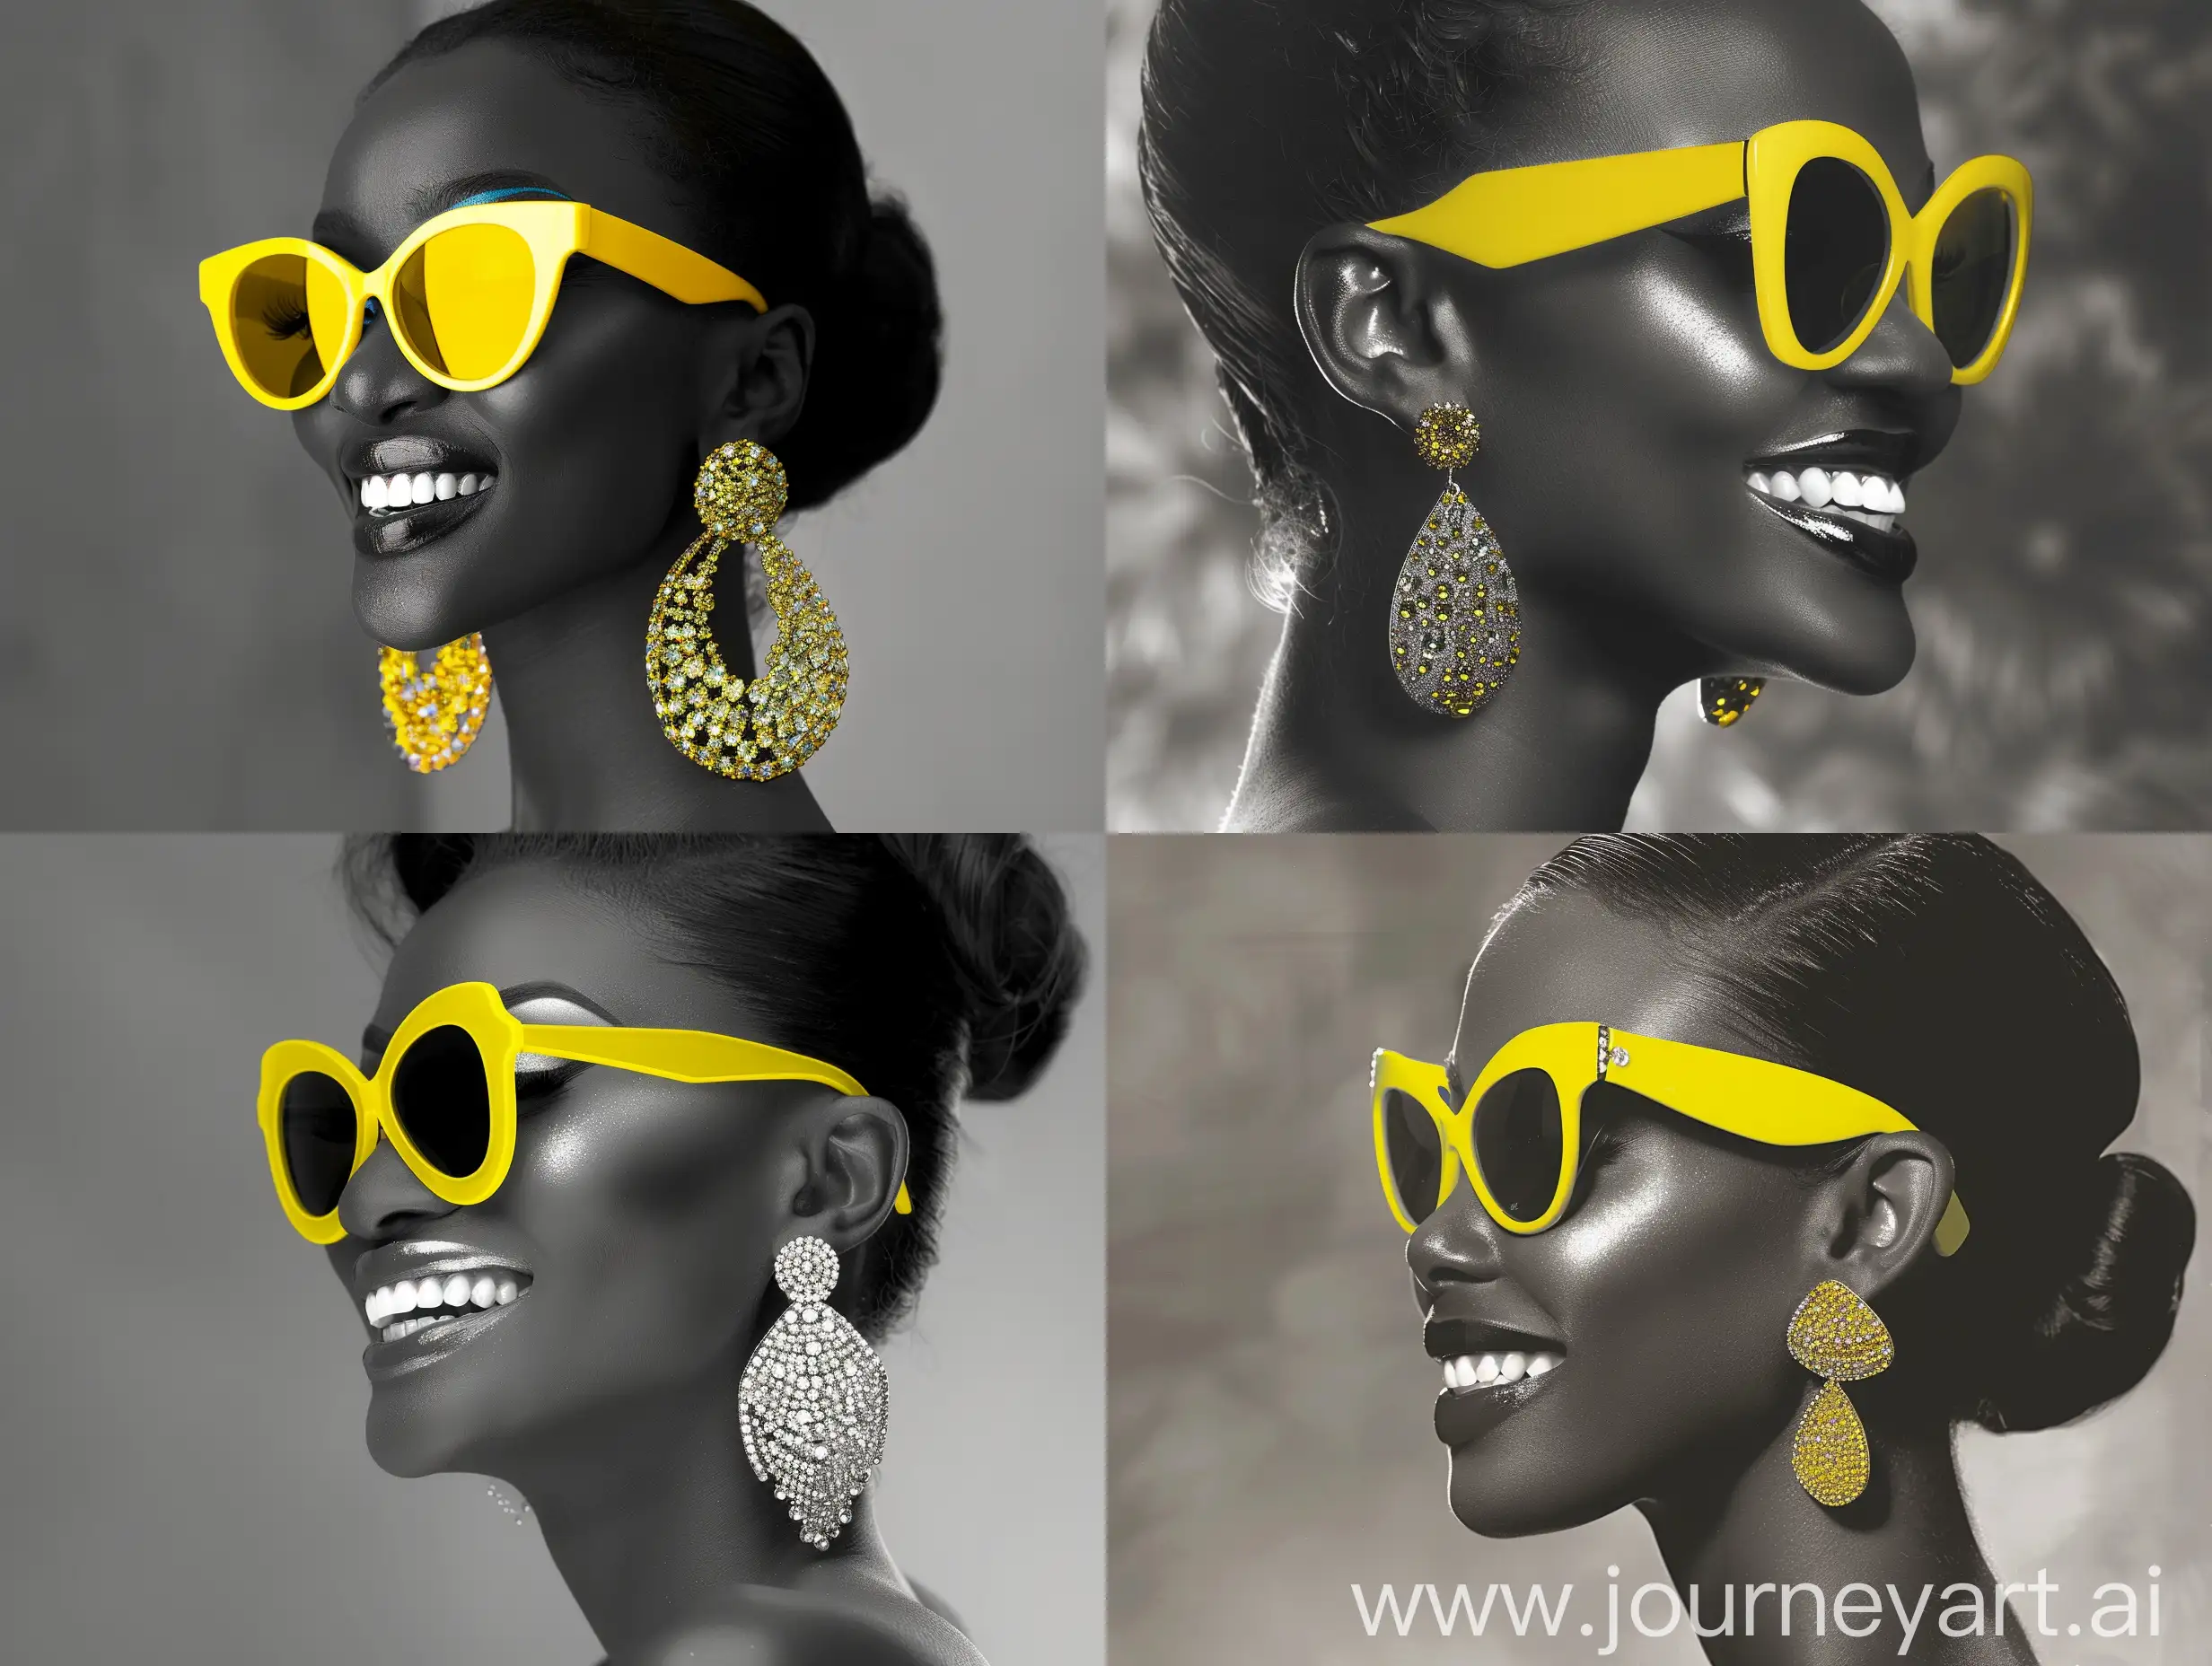 The image is a monochromatic portrait with one strikingly colorful element: a pair of bright yellow sunglasses. The sunglasses stand out vividly against the grayscale tones of the rest of the photograph. The subject is a woman with a beaming smile and flawless skin, exuding confidence and joy. She wears large, glamorous earrings that sparkle with many tiny reflections, suggesting they are encrusted with gems or crystals. Her hair is styled in a sleek updo, further accentuating the elegance of her overall look. The bright yellow of the sunglasses contrasts with the woman's dark lashes and brows, drawing attention to her joyful expression and adding a playful touch to the otherwise sophisticated and classic portrait styling. The background remains out of focus, ensuring that the viewer's attention remains on the woman and her striking accessories.